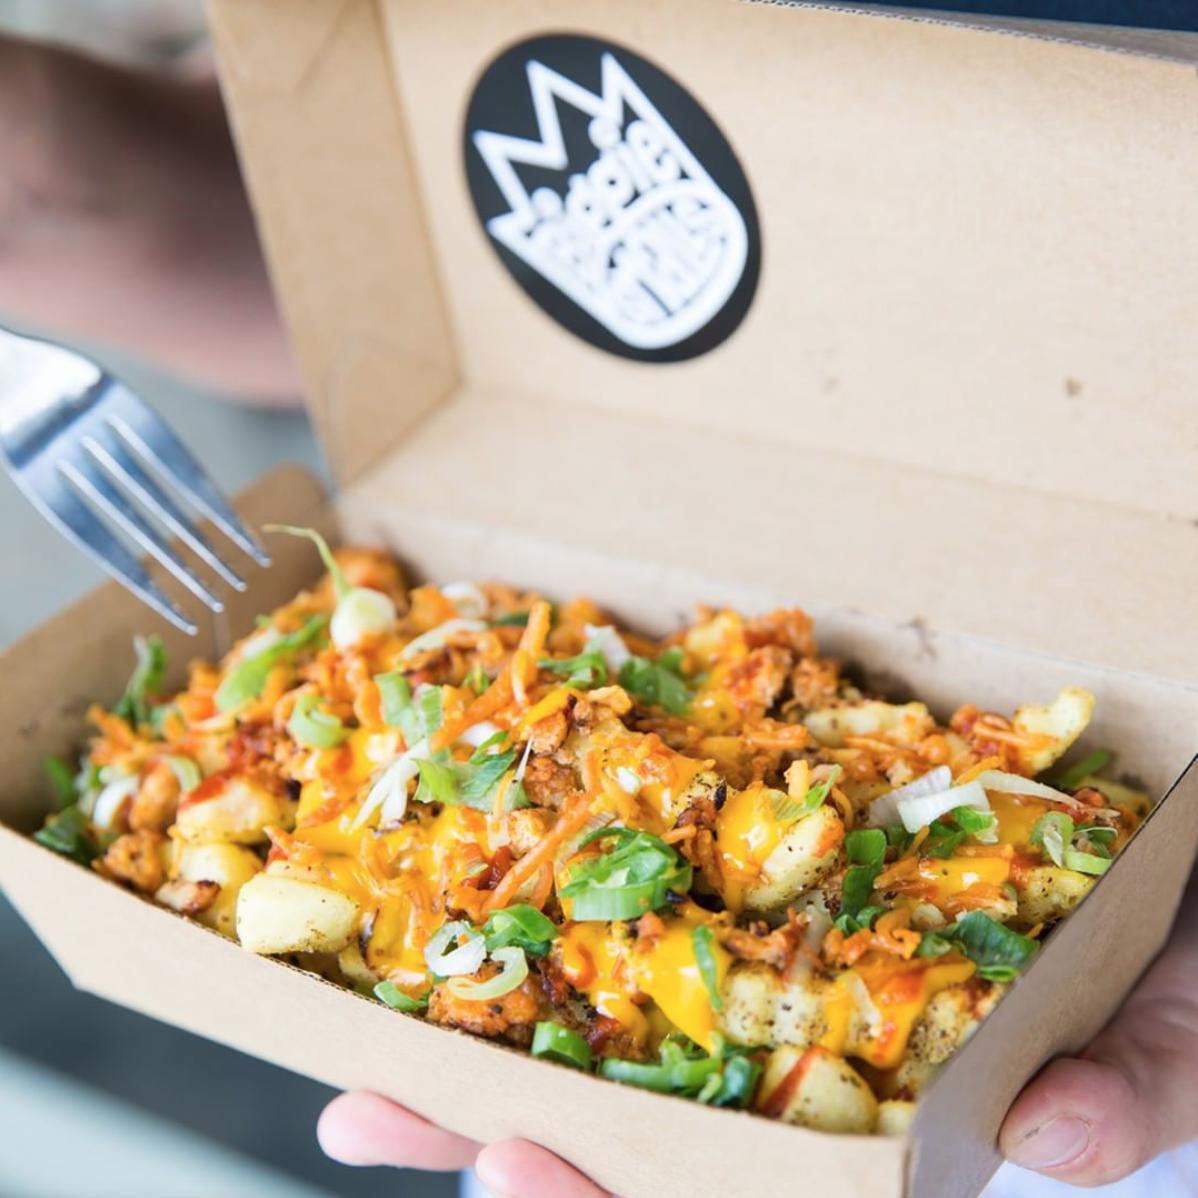 A classic. Biggies Loaded Chips with spiced ground chicken, fried haloumi crumbs, sriracha, cheese sauce and spring onion 🤤